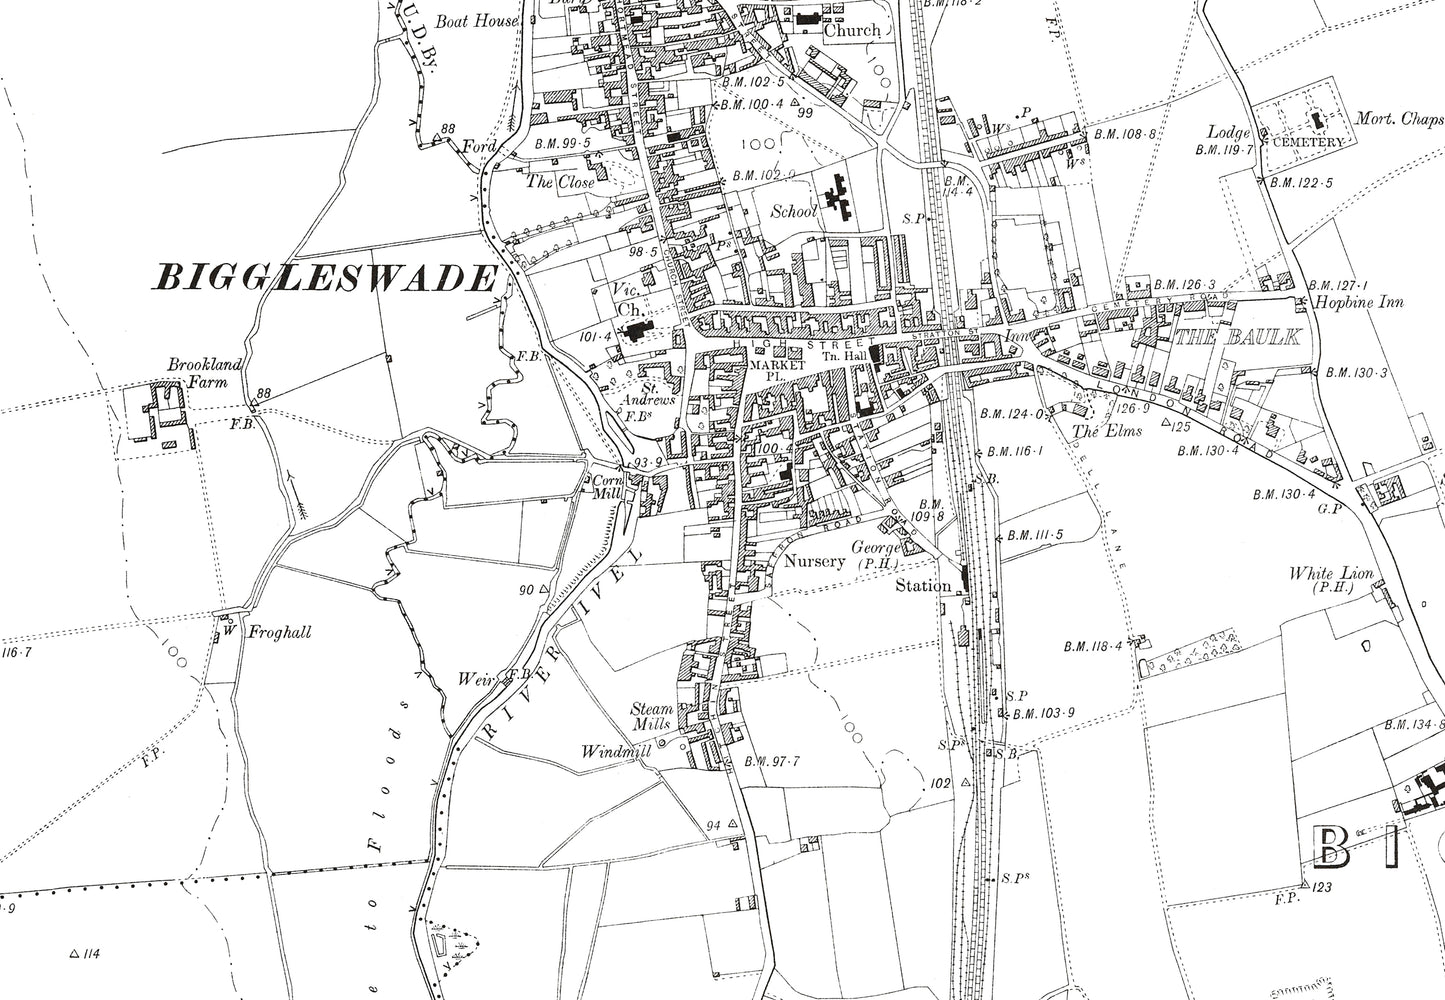 A 1902 map showing Biggleswade and Upper Caldecote in Bedfordshire - A Digital Download 0f OS 1:10560 scale map, Beds 18SW